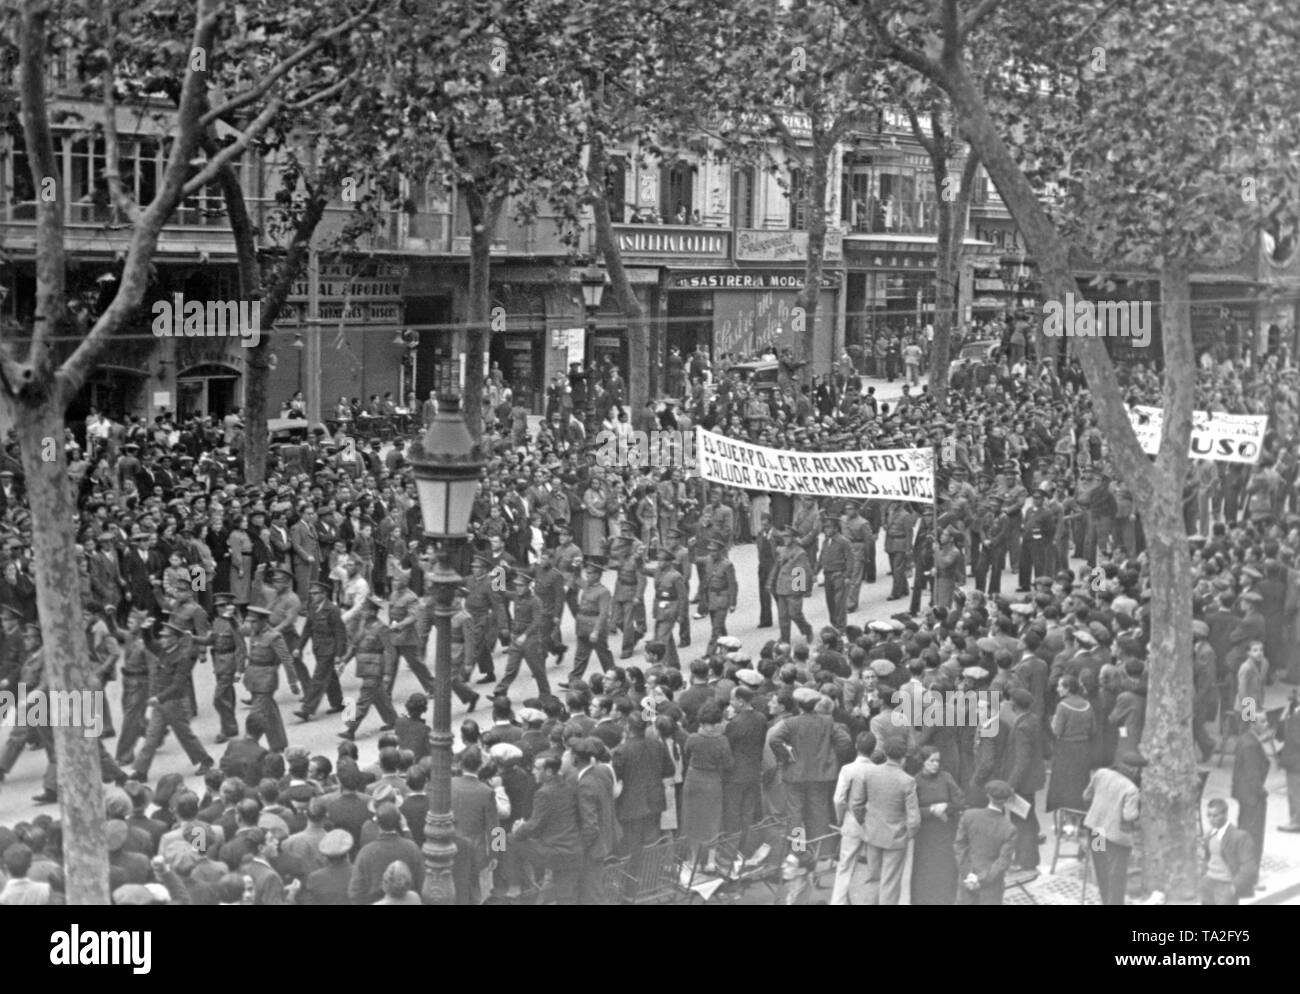 Photo of a Republican demonstration in remembrance of the 19. anniversary of the October Revolution (November 1917) on the Rambla (Promenade Las Ramblas) at the beginning of November, 1936. The marching military policemen carry a banner: 'The military police (Carabineros) greet their Soviet-Russian brothers.' The police officers in uniform raise their fists saluting. Passers-by watch the scene on the pavement. Stock Photo